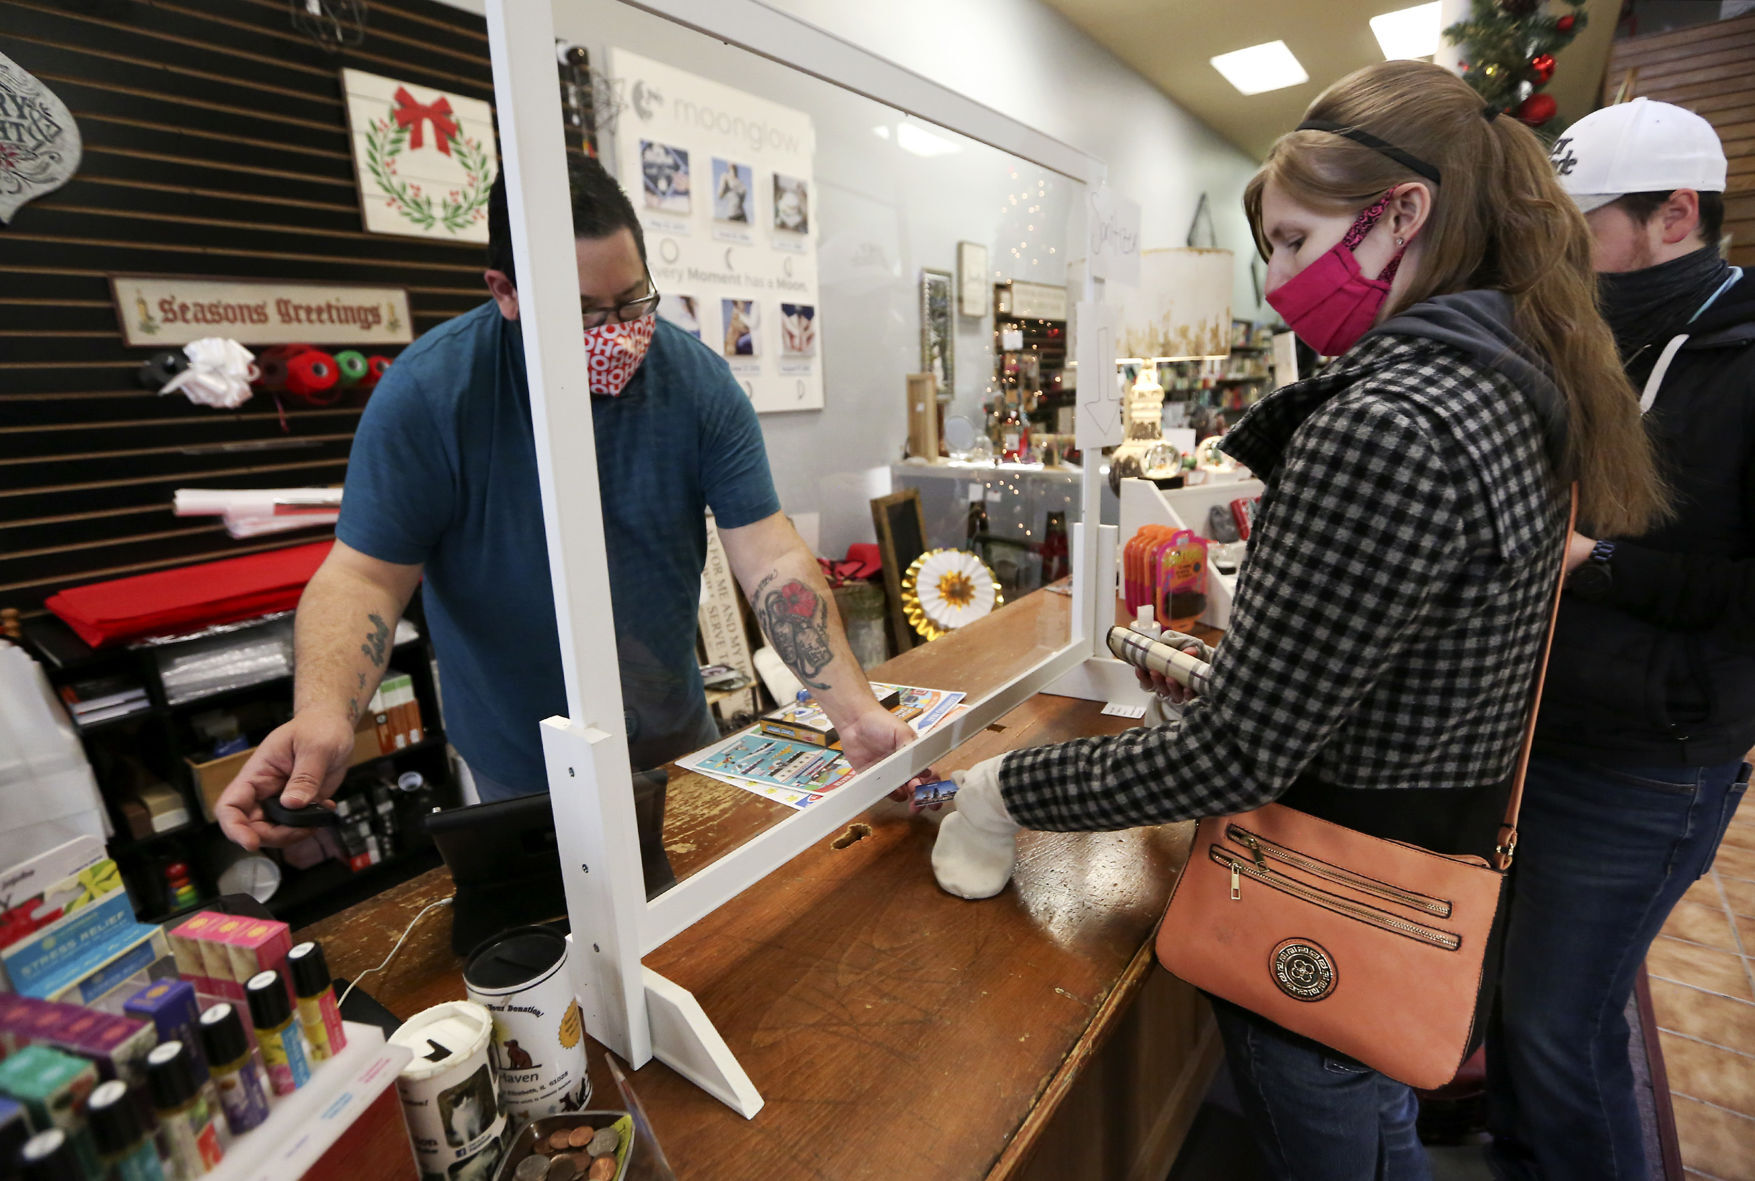 Steven Gonzalez (from left) completes a transaction for Holly Koenig and Matthew Koenig, both of Rockford, Ill., at Gabby’s Gifts in Galena, Ill., on Friday. Retailers in Galena are cautiously optimistic as Thanksgiving weekend approaches. PHOTO CREDIT: NICKI KOHL, Telegraph Herald